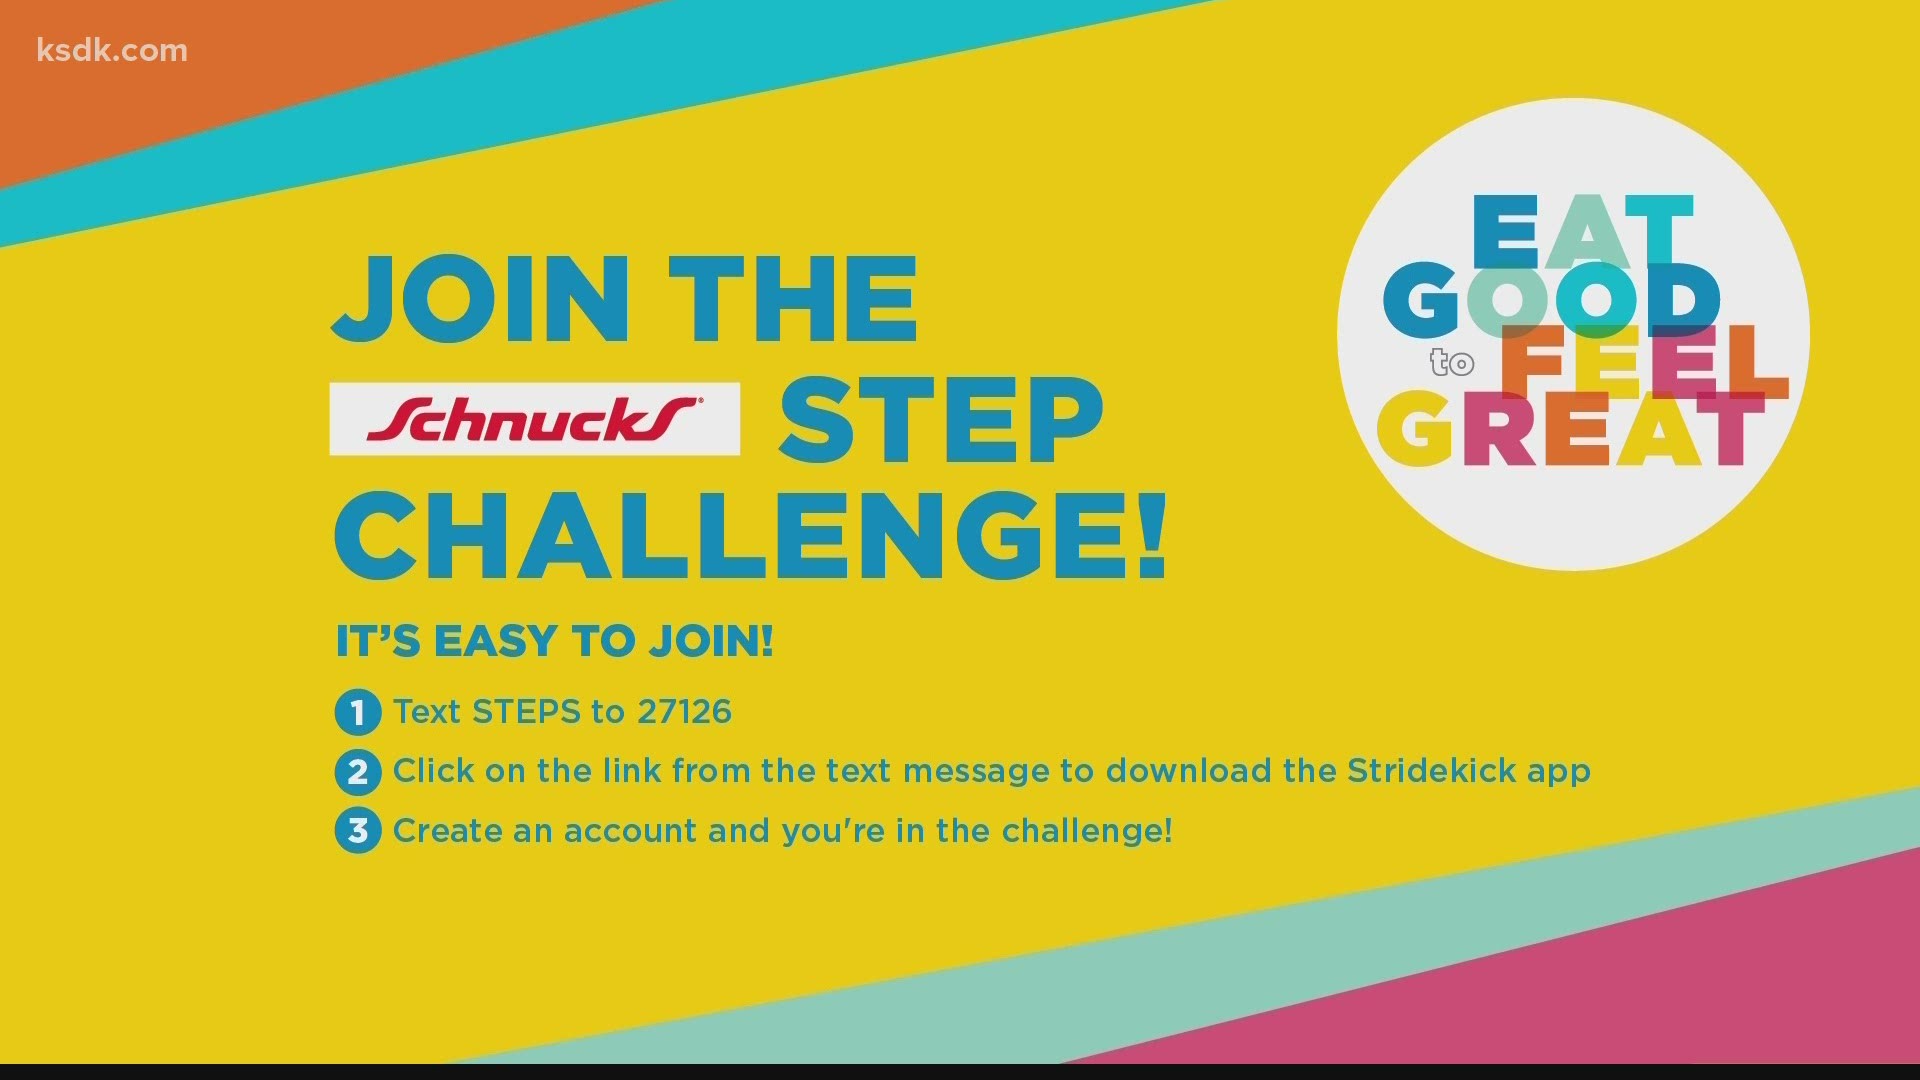 Earn rewards and get fit this winter with the Schnucks Step Challenge.